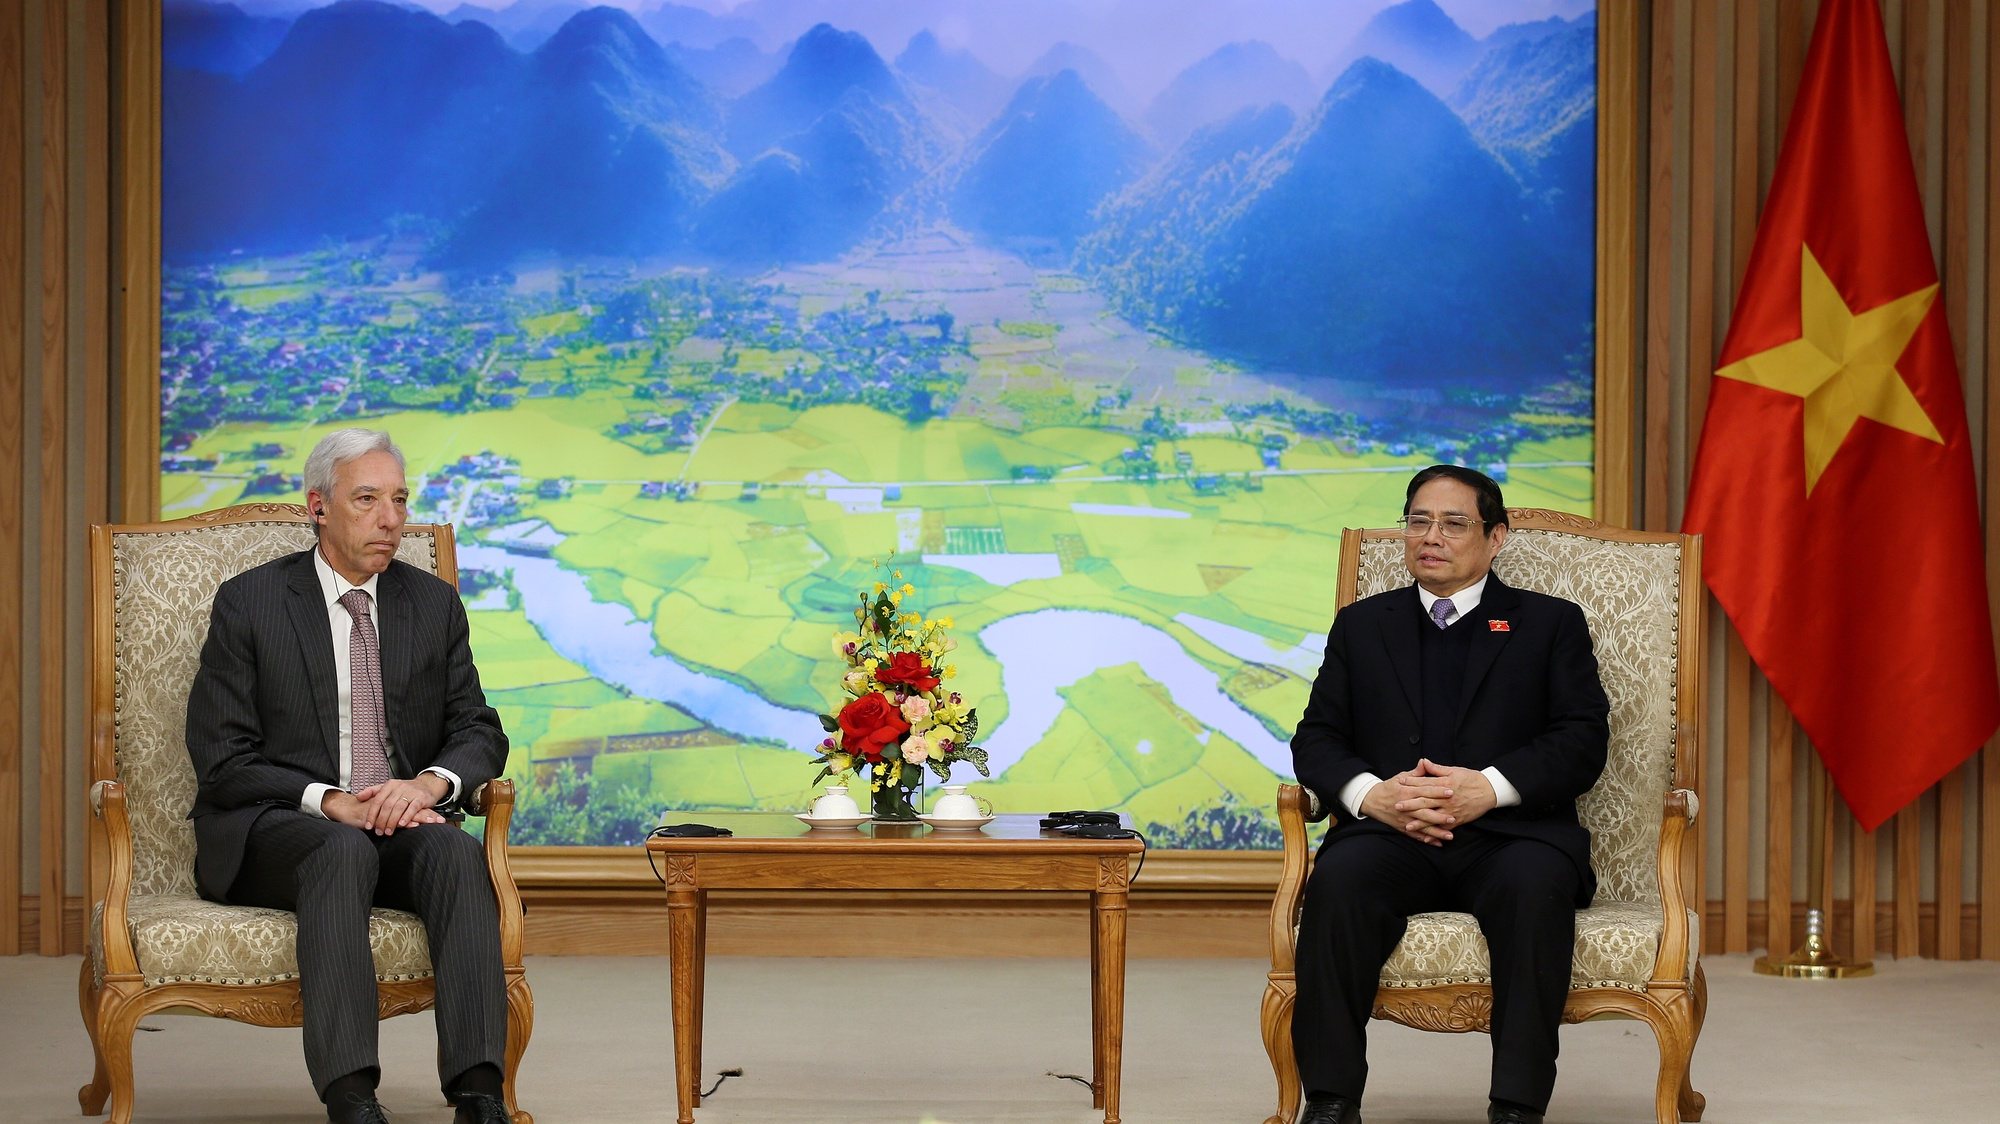 epa10413171 Portuguese Foreign Minister Joao Gomes Cravinho (L) meets with Vietnamese Prime Minister Pham Minh Chinh at the Government Office in Hanoi, Vietnam, 18 January 2023. Cravinho is on an official visit to Vietnam from 17 to 19 January 2023.  EPA/LUONG THAI LINH